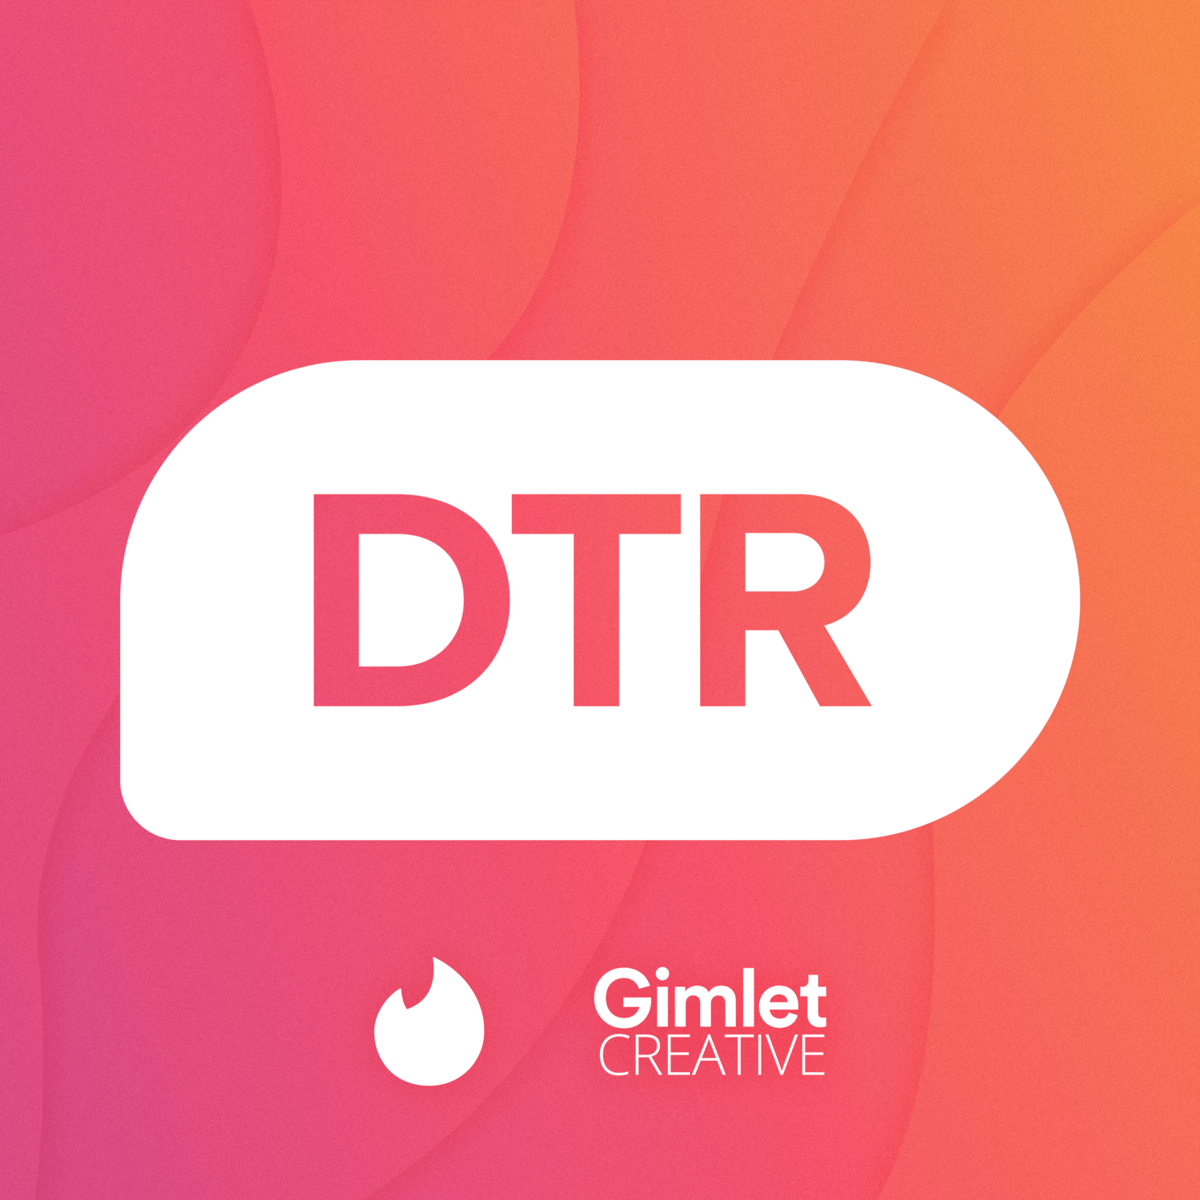 Review: DTR from Tinder